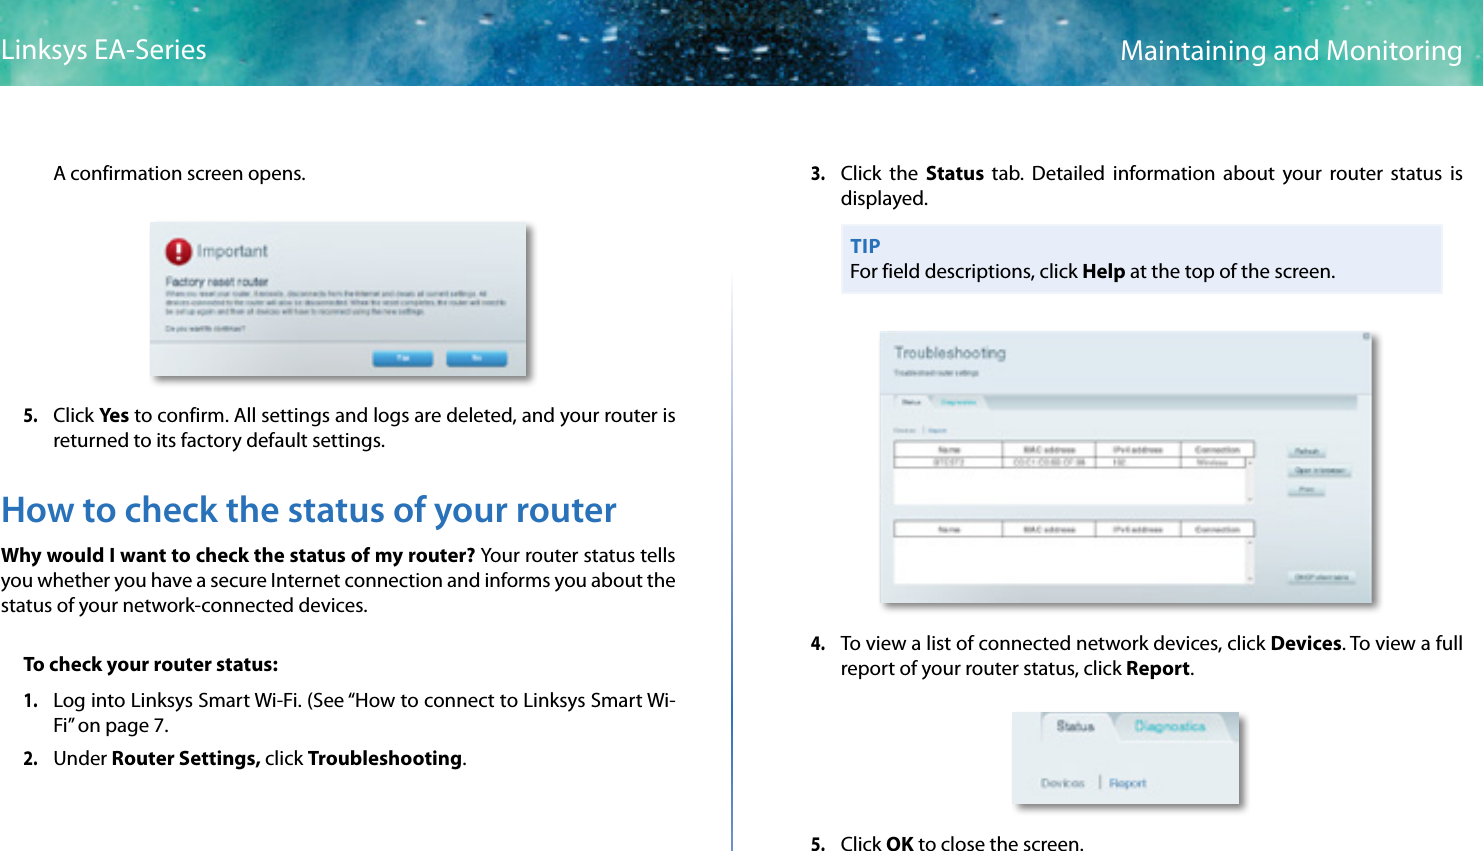 49Maintaining and MonitoringLinksys EA-SeriesA confirmation screen opens.5. Click Ye s to confirm. All settings and logs are deleted, and your router is returned to its factory default settings.How to check the status of your routerWhy would I want to check the status of my router? Your router status tells you whether you have a secure Internet connection and informs you about the status of your network-connected devices.To check your router status:1. Log into Linksys Smart Wi-Fi. (See “How to connect to Linksys Smart Wi-Fi” on page 7.2. Under Router Settings, click Troubleshooting. 3. Click the Status  tab. Detailed information about your router status is displayed.TIPFor field descriptions, click Help at the top of the screen.4. To view a list of connected network devices, click Devices. To view a full report of your router status, click Report.5. Click OK to close the screen.